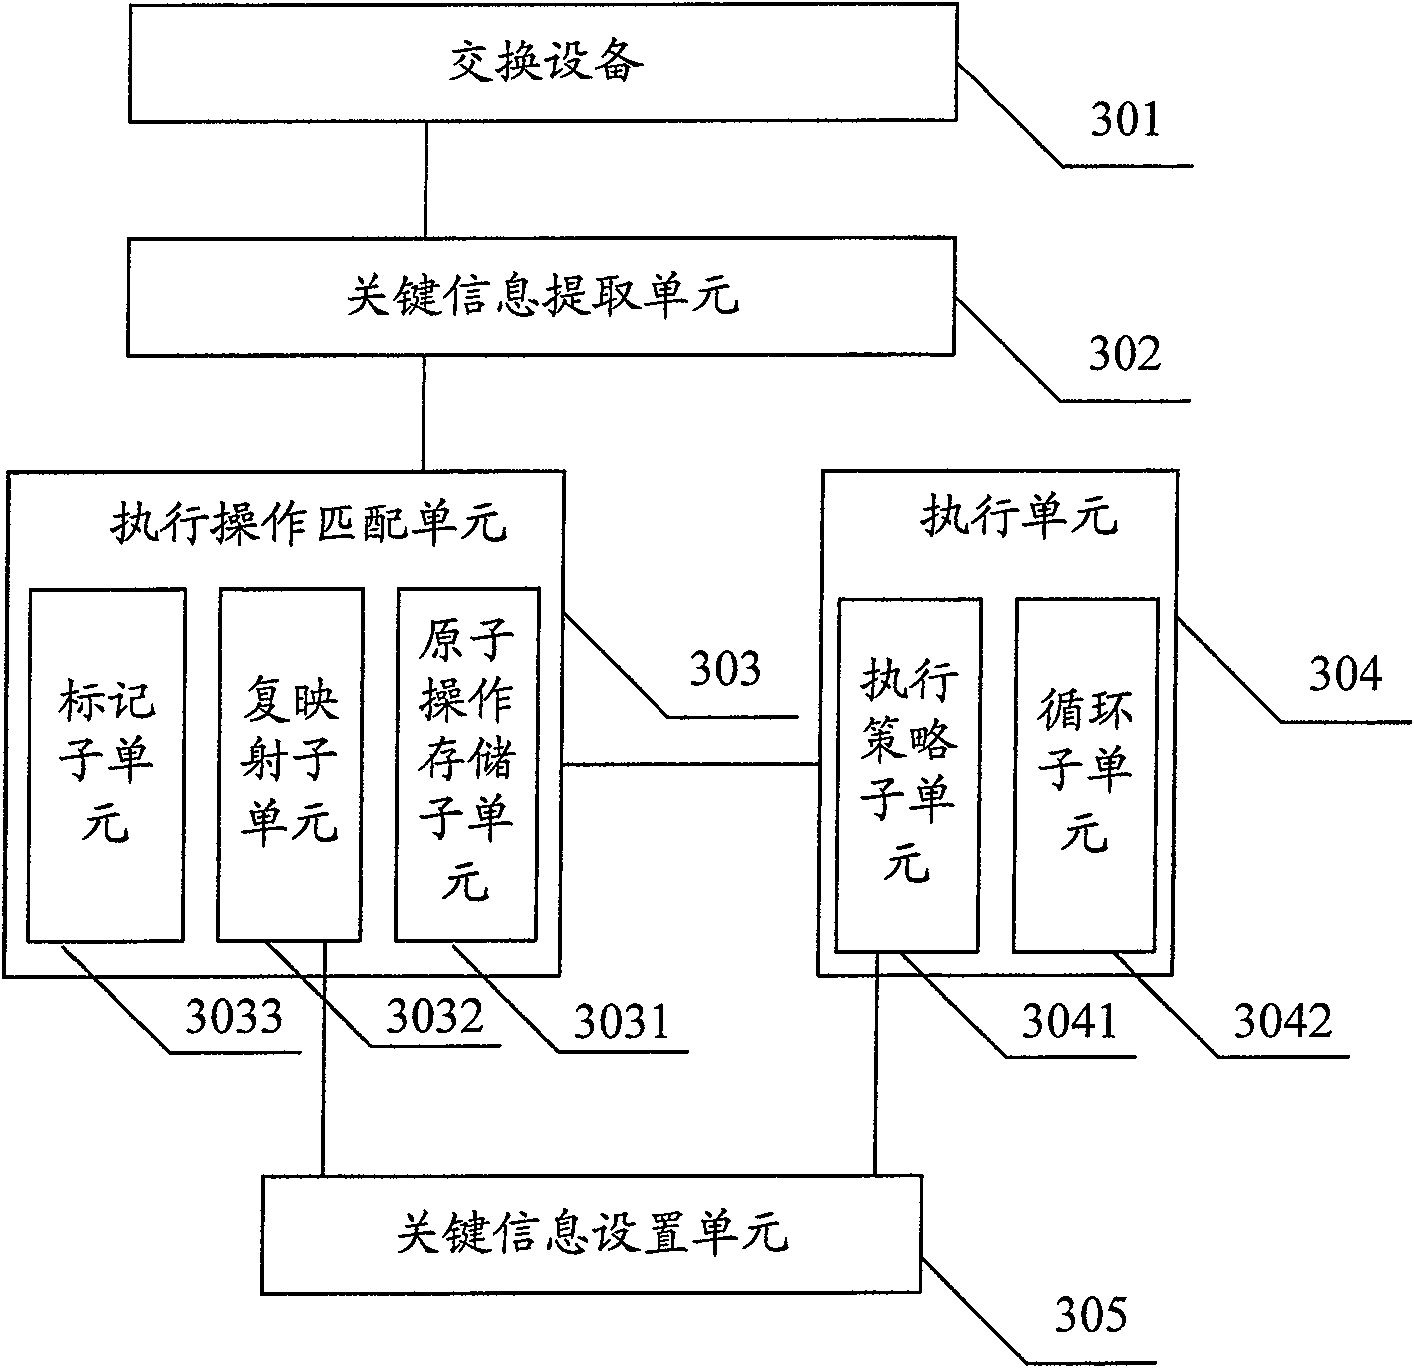 Network application information processing system and method